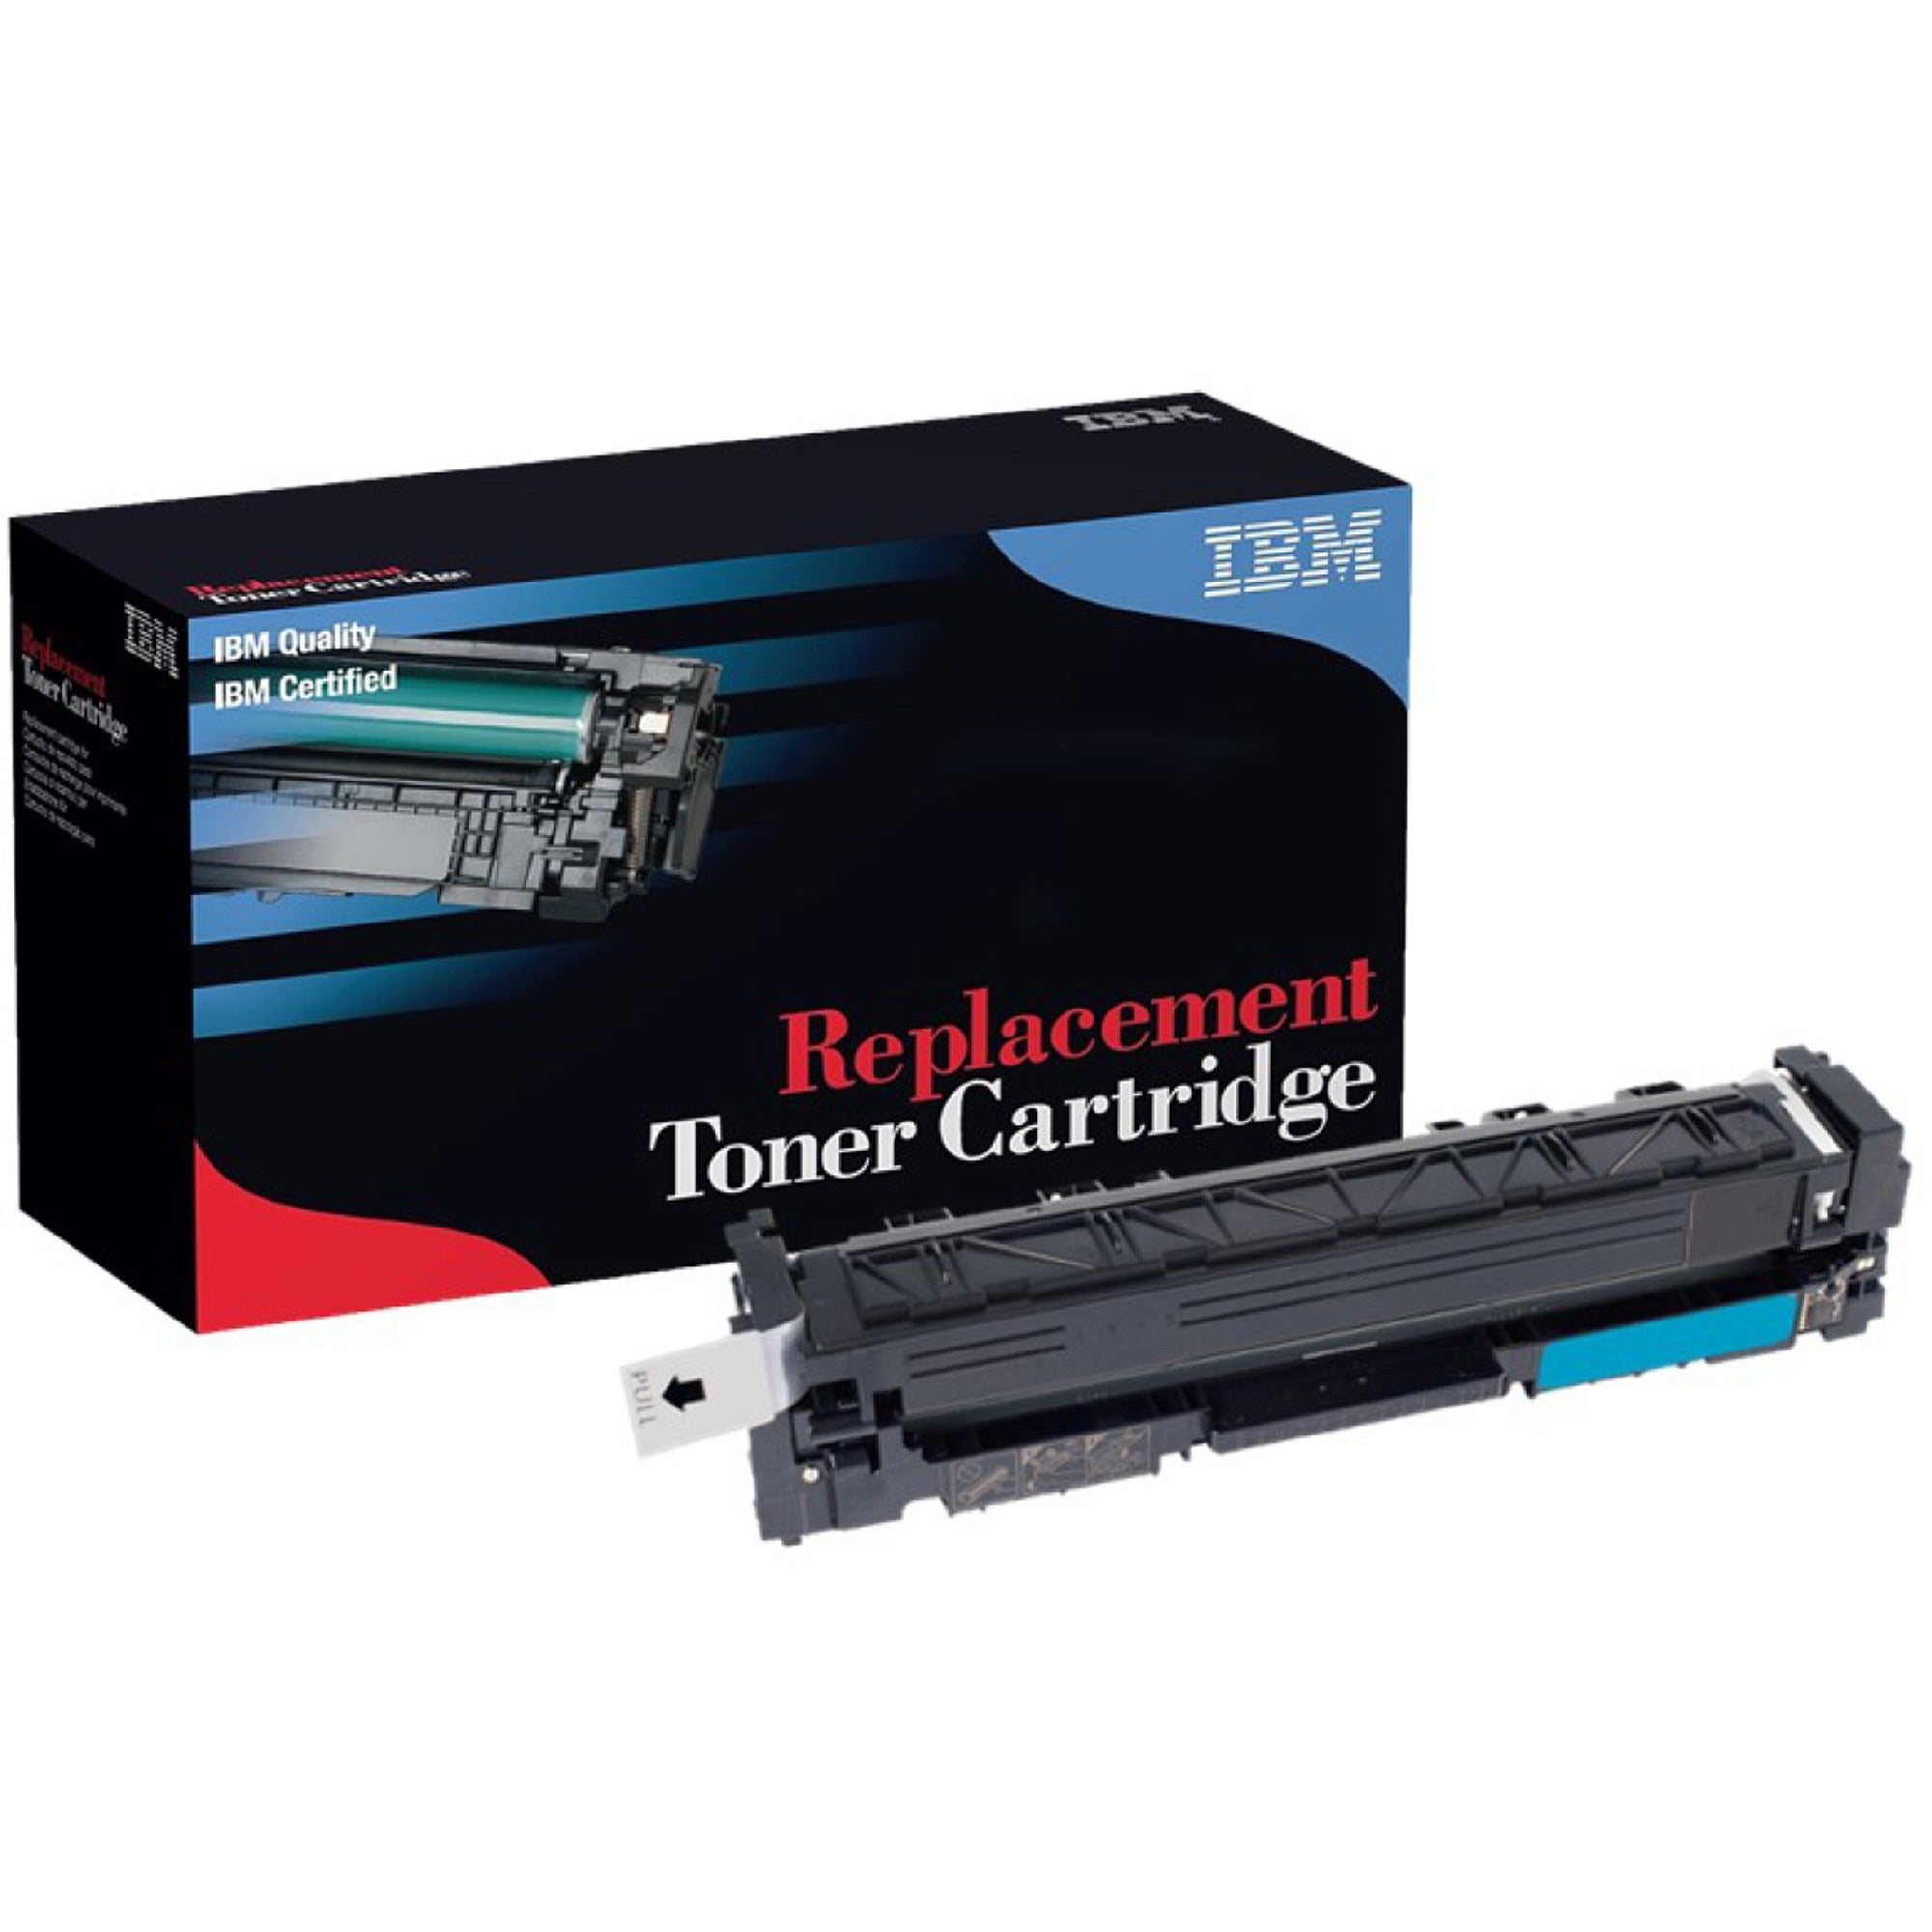 ibm-laser-toner-cartridge-alternative-for-hp-655a-cf451a-cyan-1-each-10500-pages_ibmtg95p6696 - 1